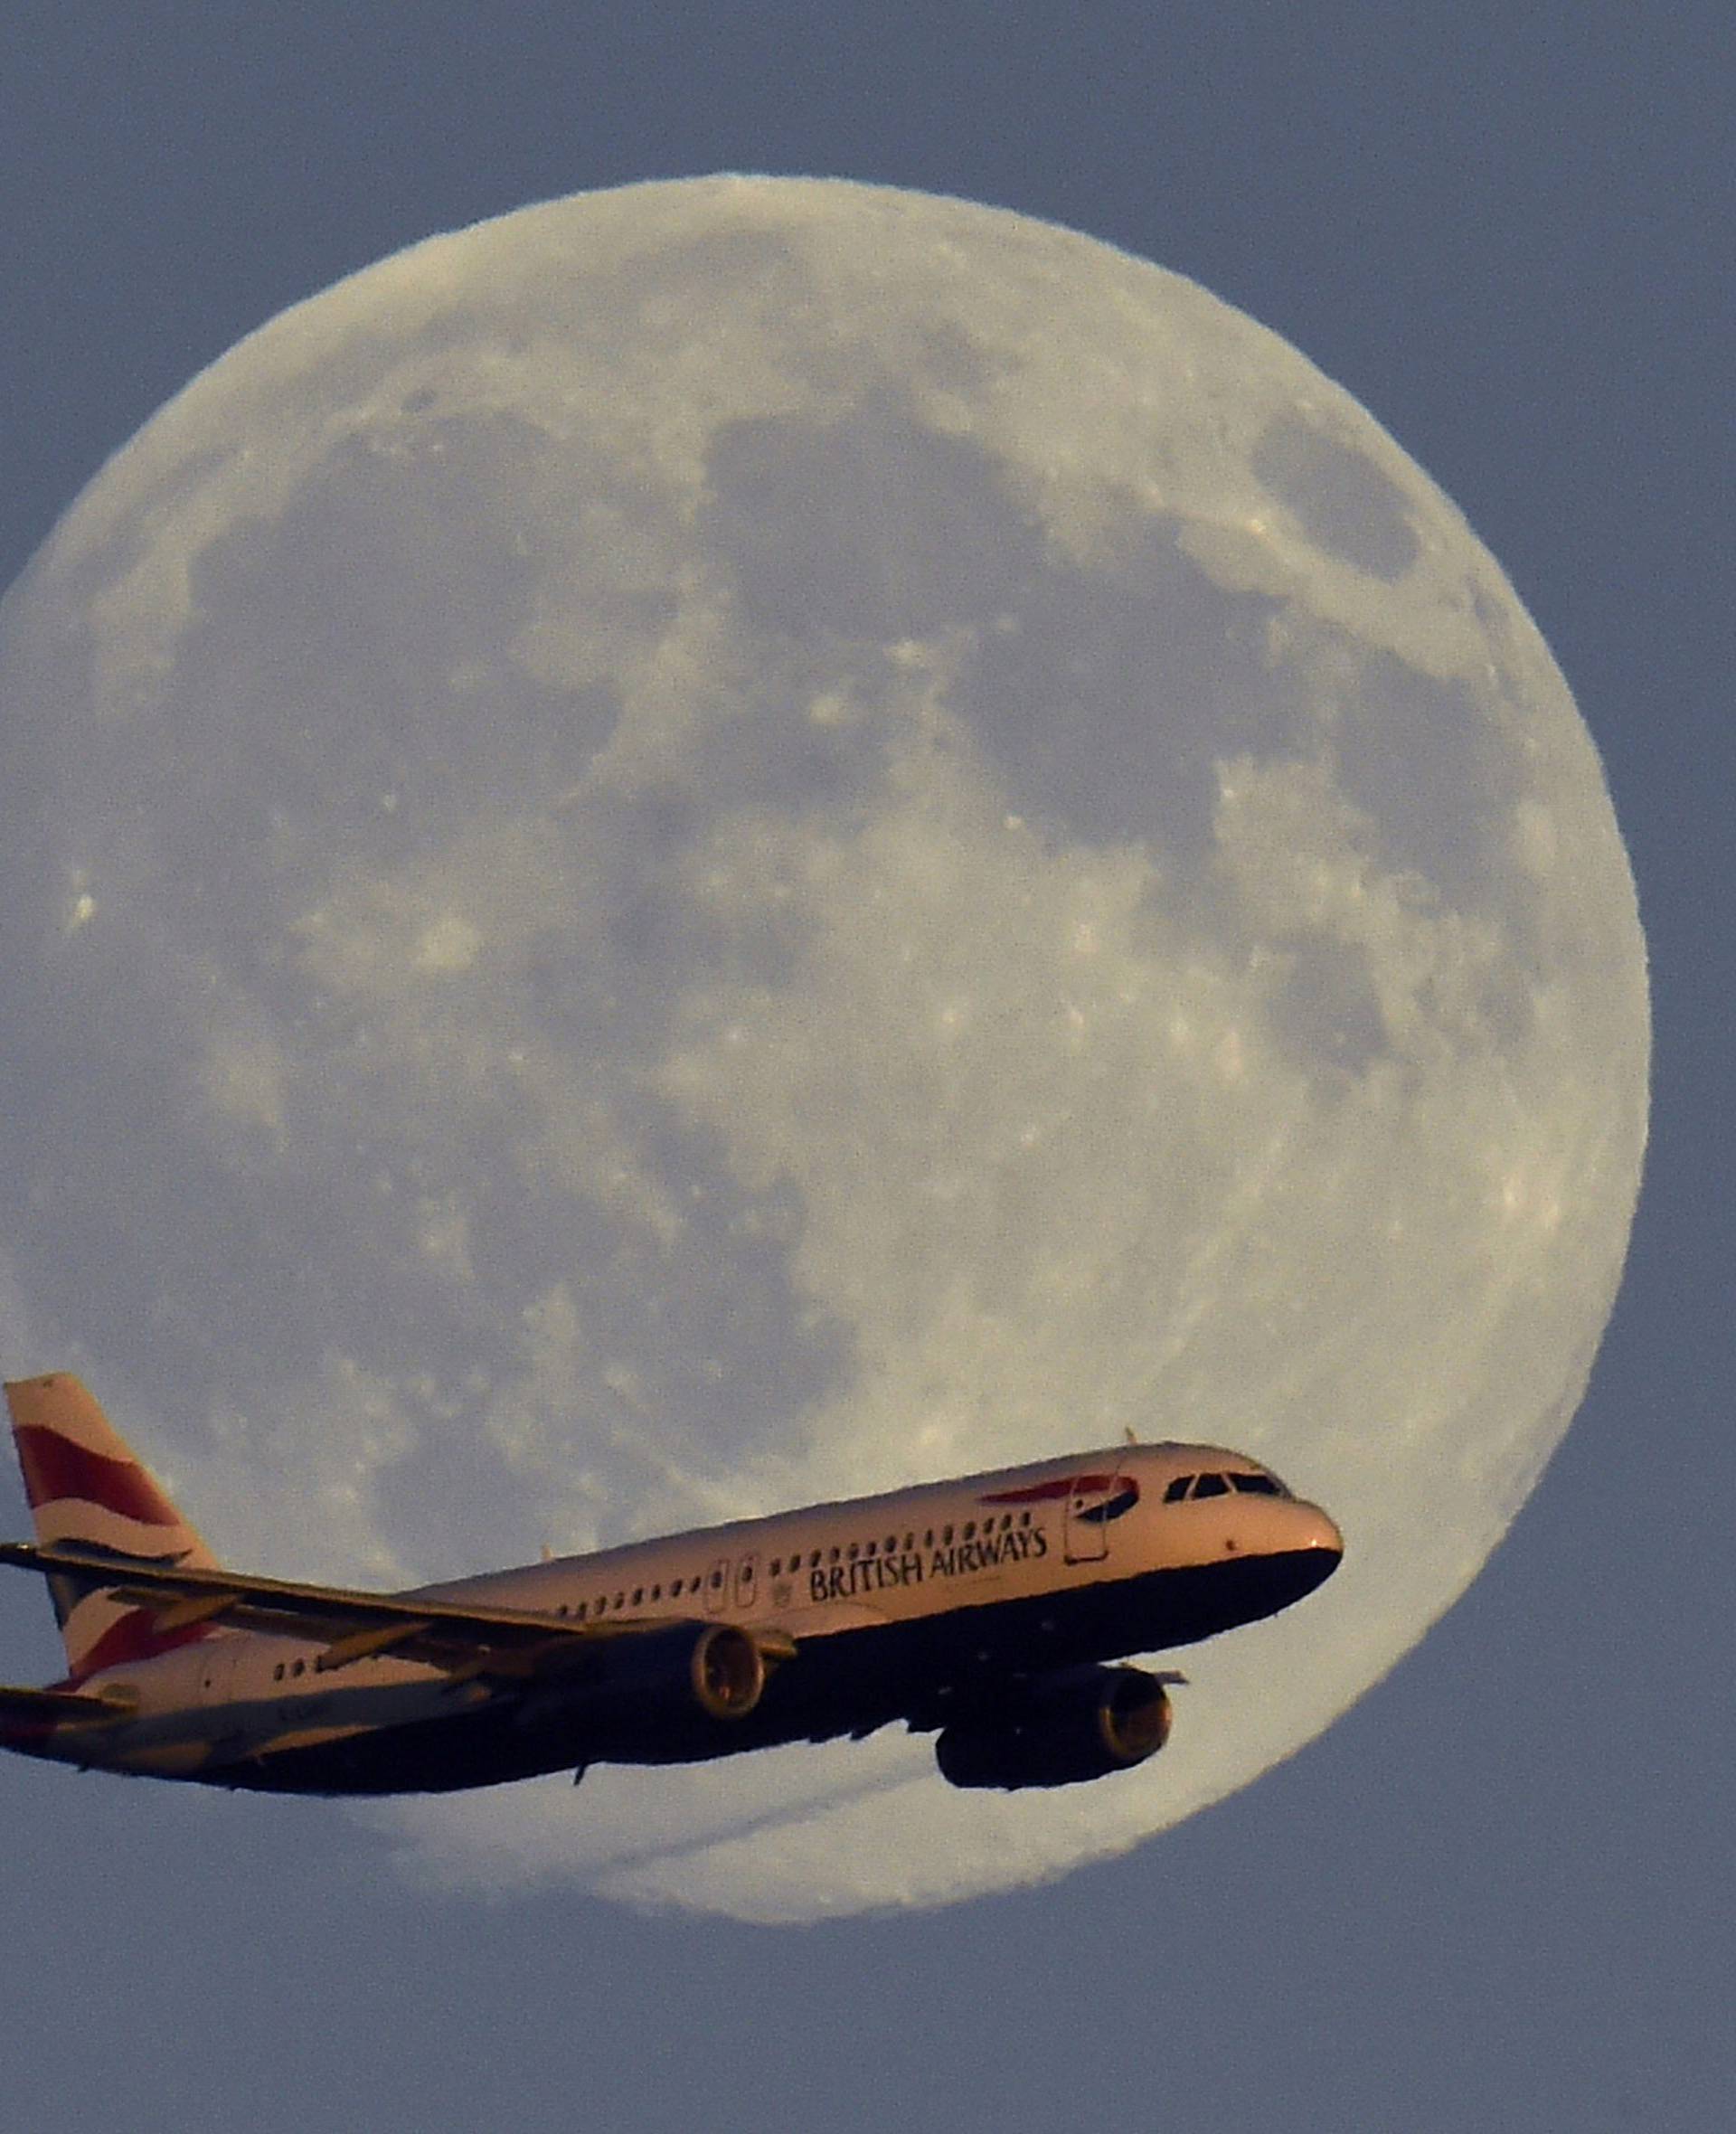 A British Airways passenger aircraft passes in front of the moon as it makes it's landing approach towards Heathrow Airport in west London in this photograph taken on July 18, 2016.